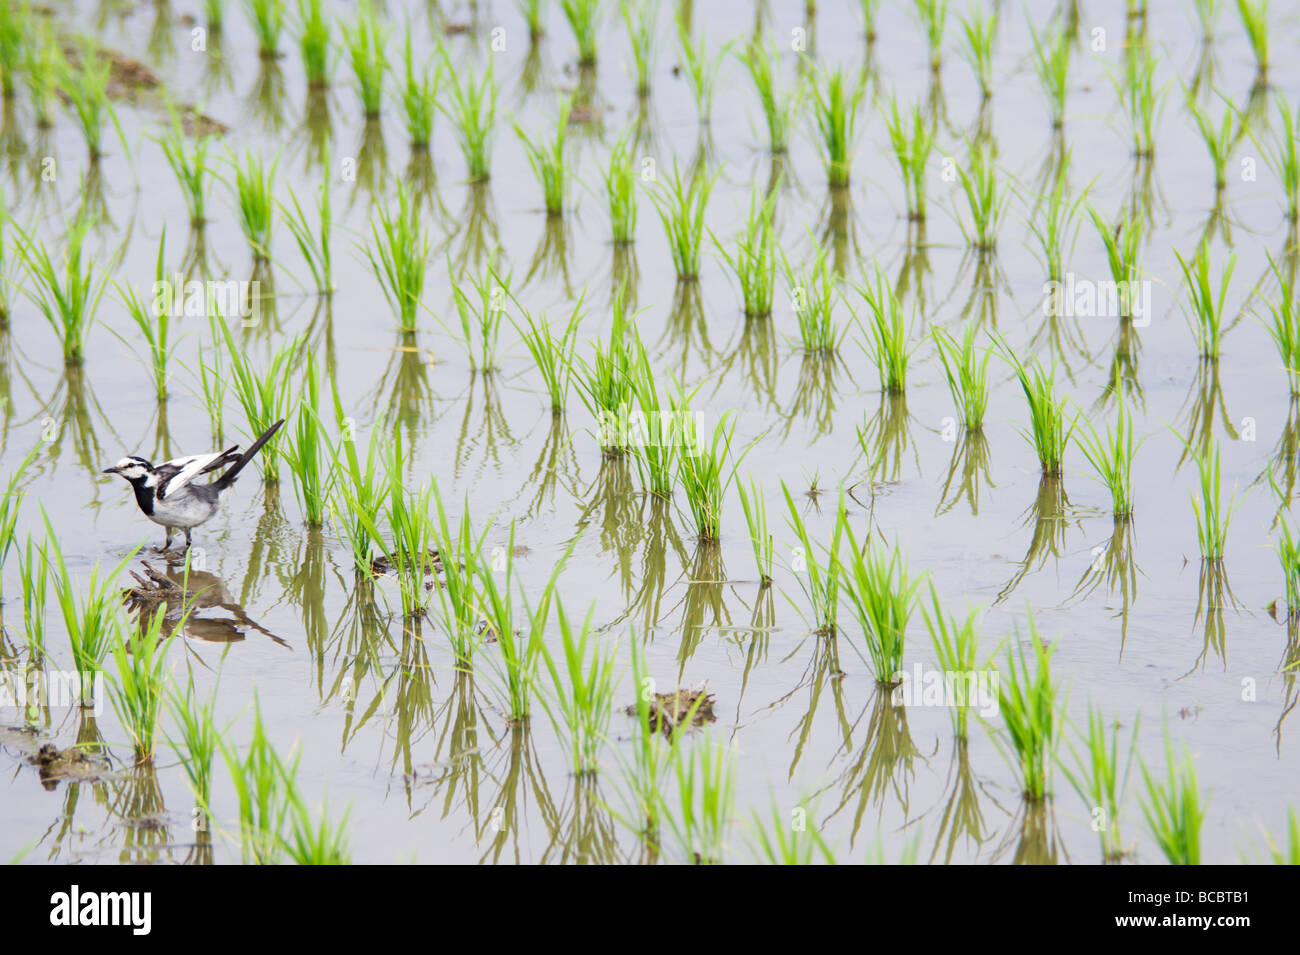 A wet paddy field in Shikoku Japan with a bird reflected in the water amongst the newly planted rice. Stock Photo